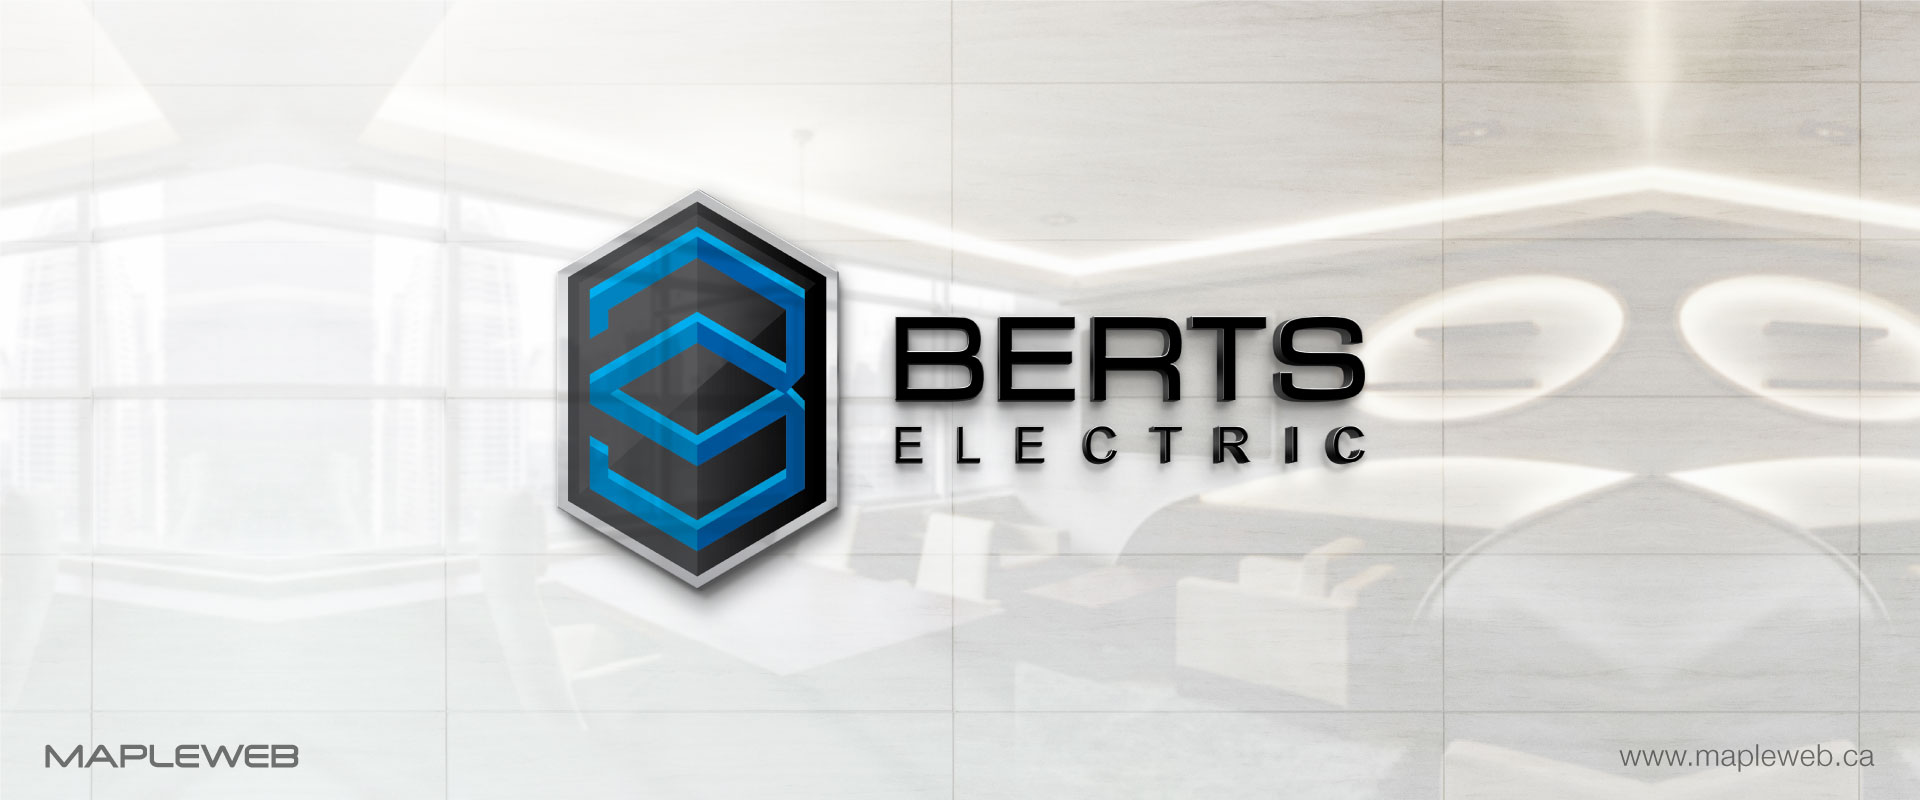 berts-electric-brand-logo-design-by-mapleweb-vancouver-canada-glass-signage-mock